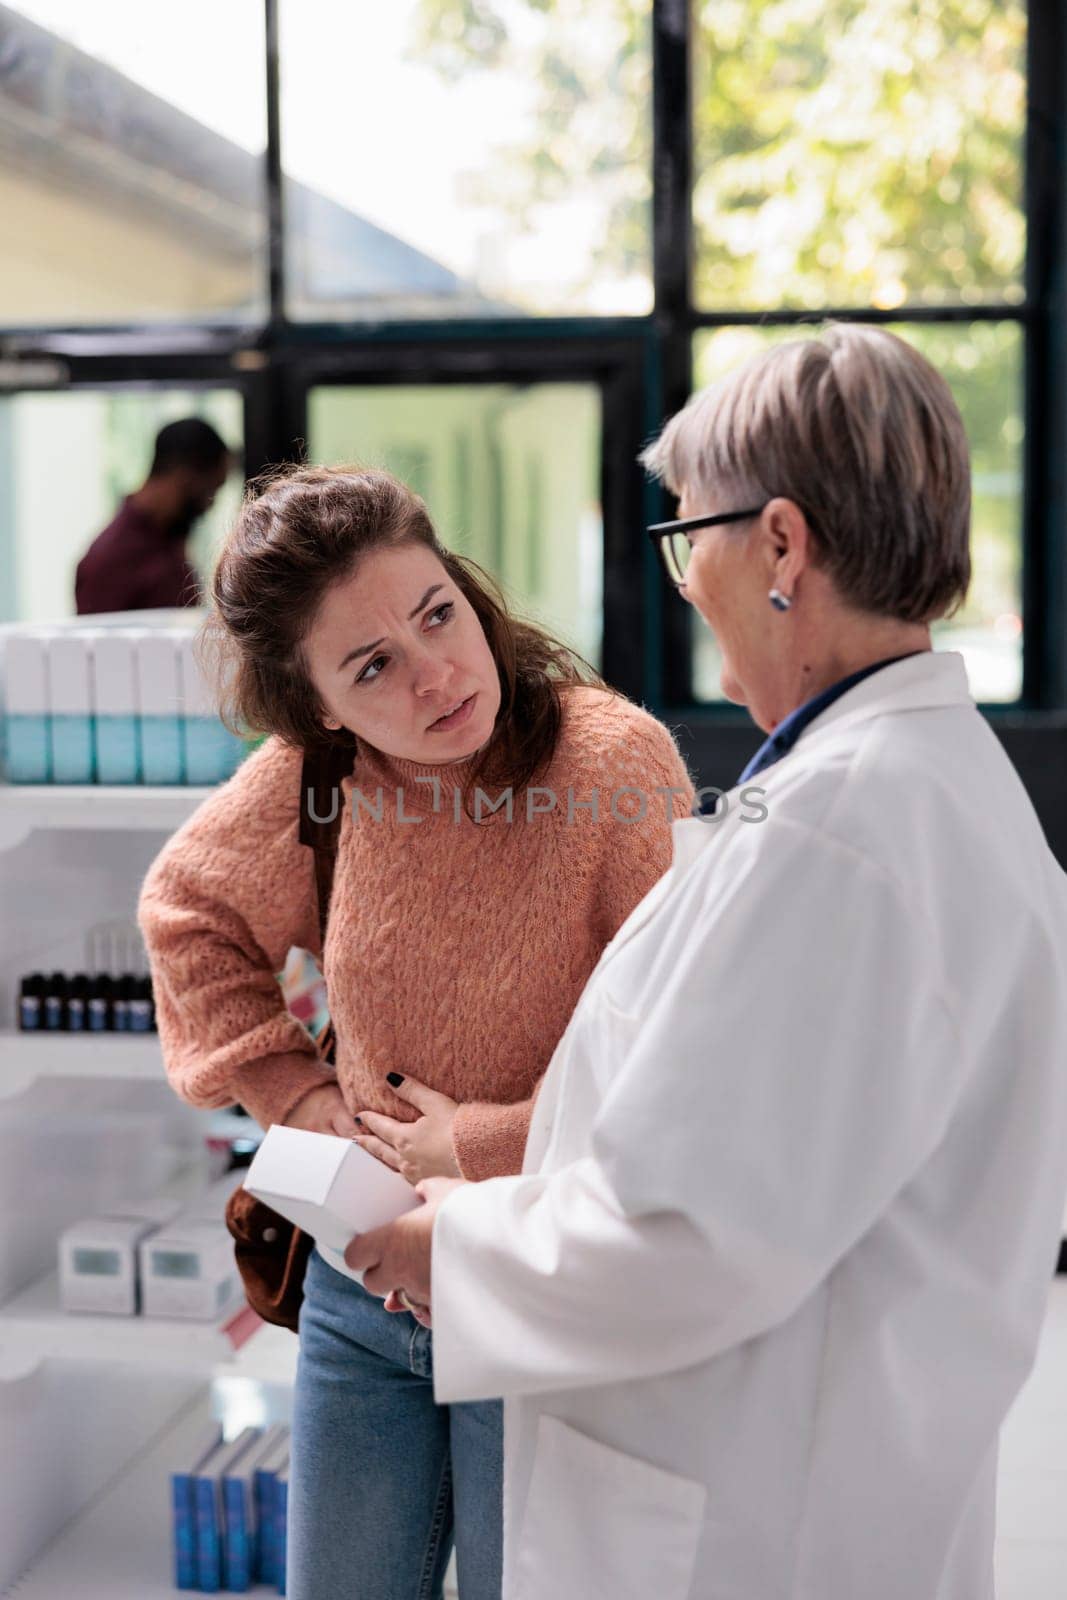 Drugstore worker helping sick adult client with abdominal cramps offering stomachache medication by DCStudio